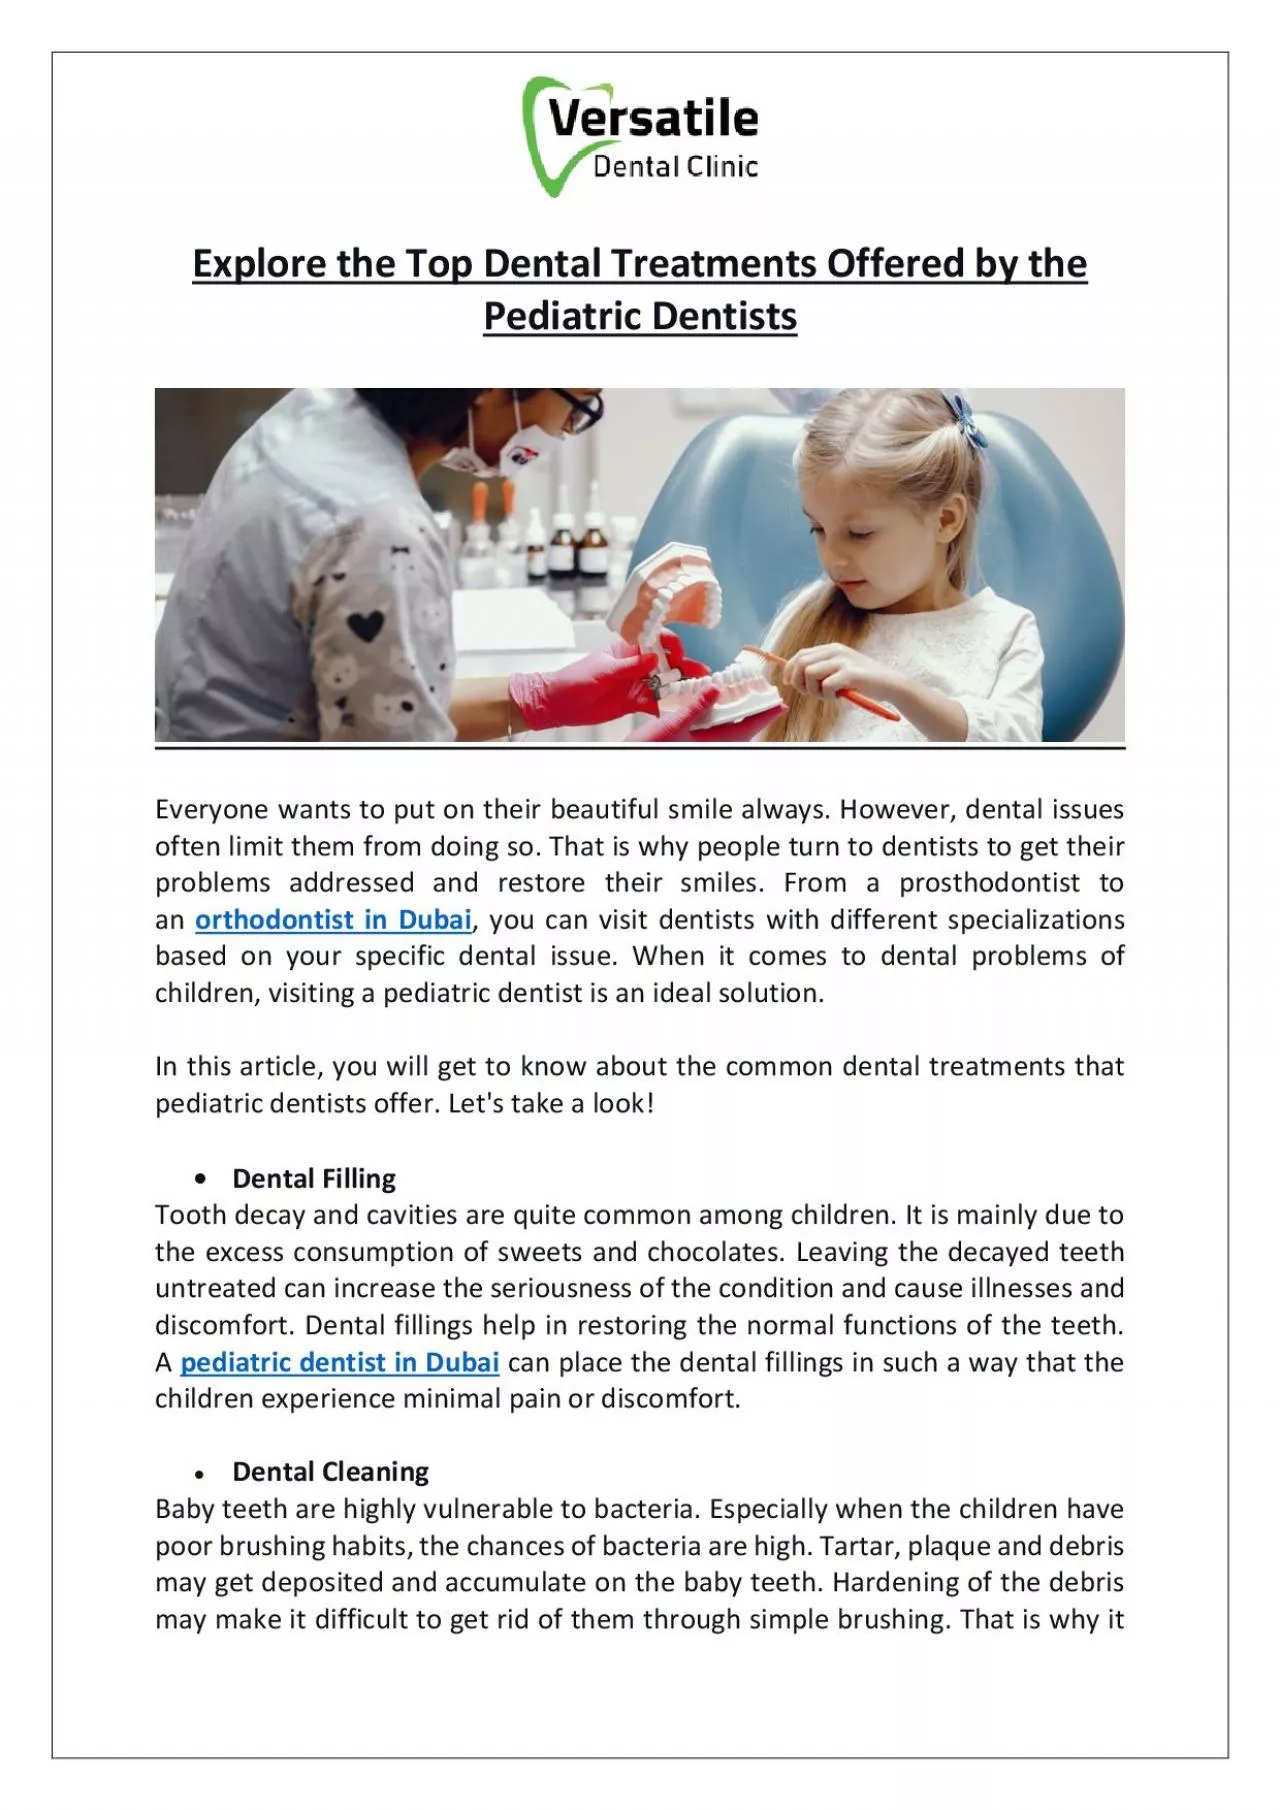 Explore the Top Dental Treatments Offered by the Pediatric Dentists